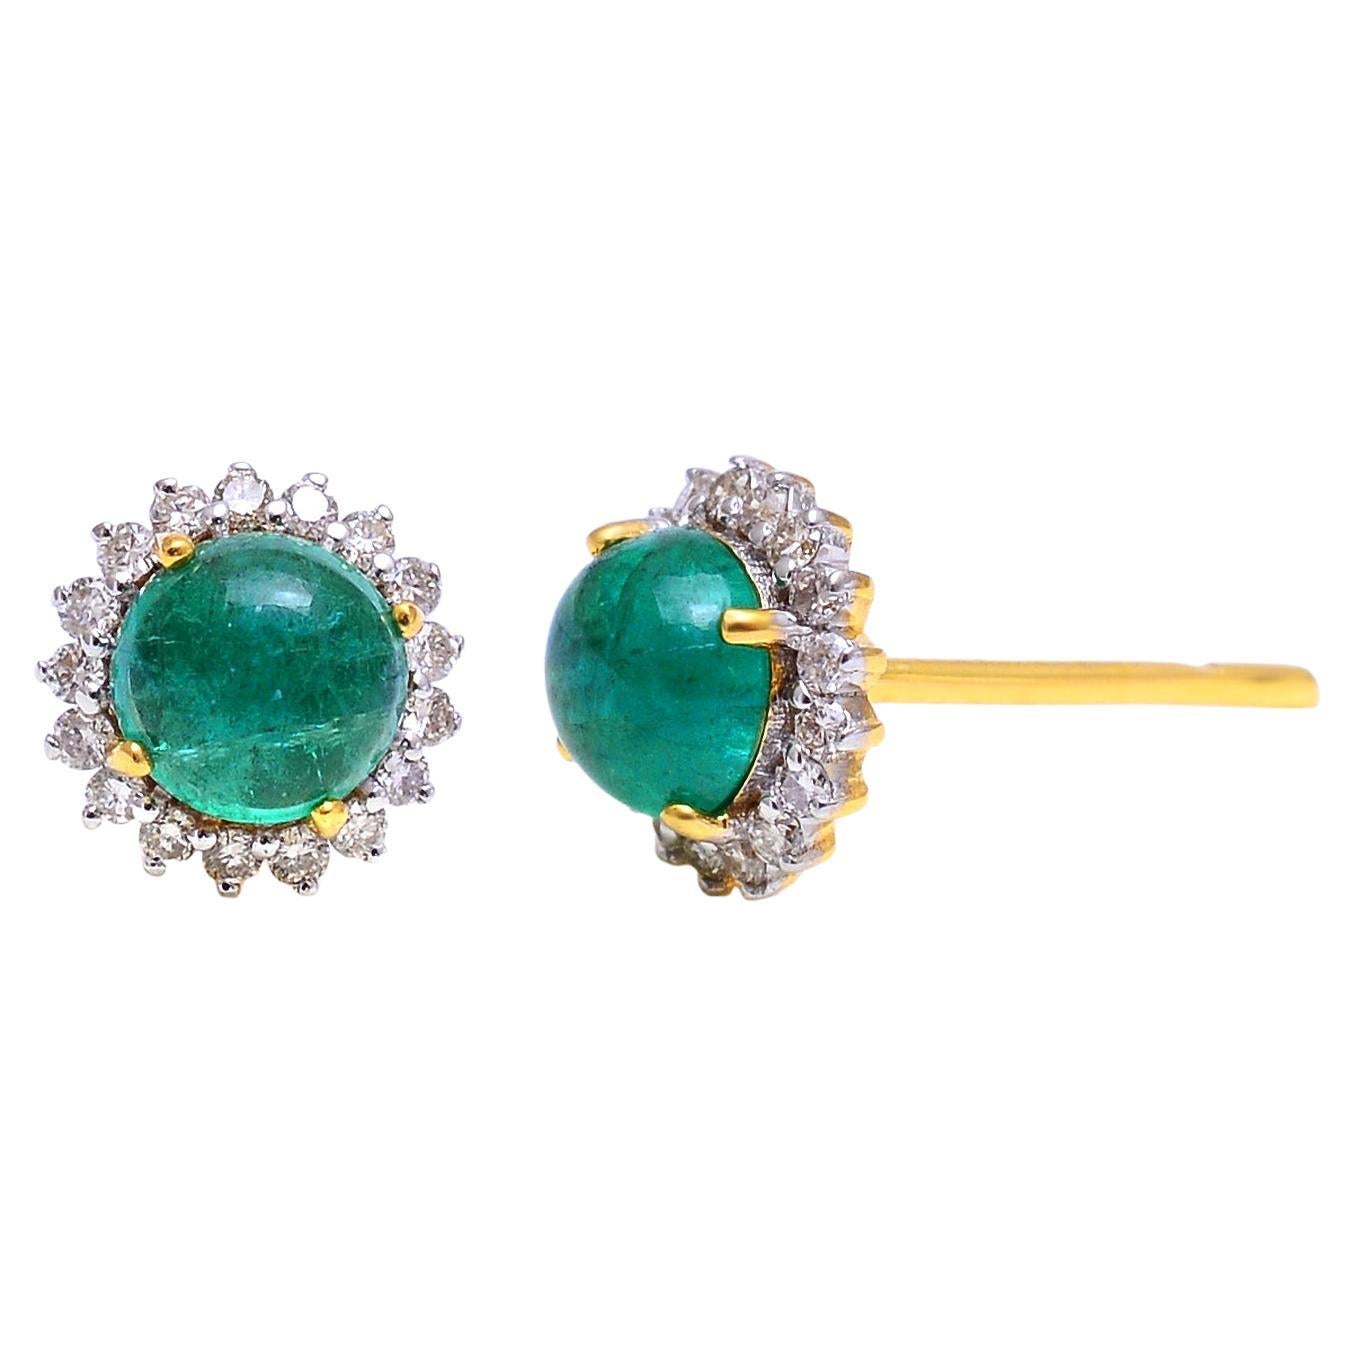 Emerald Stud Earrings with Diamond in 14k Gold For Sale